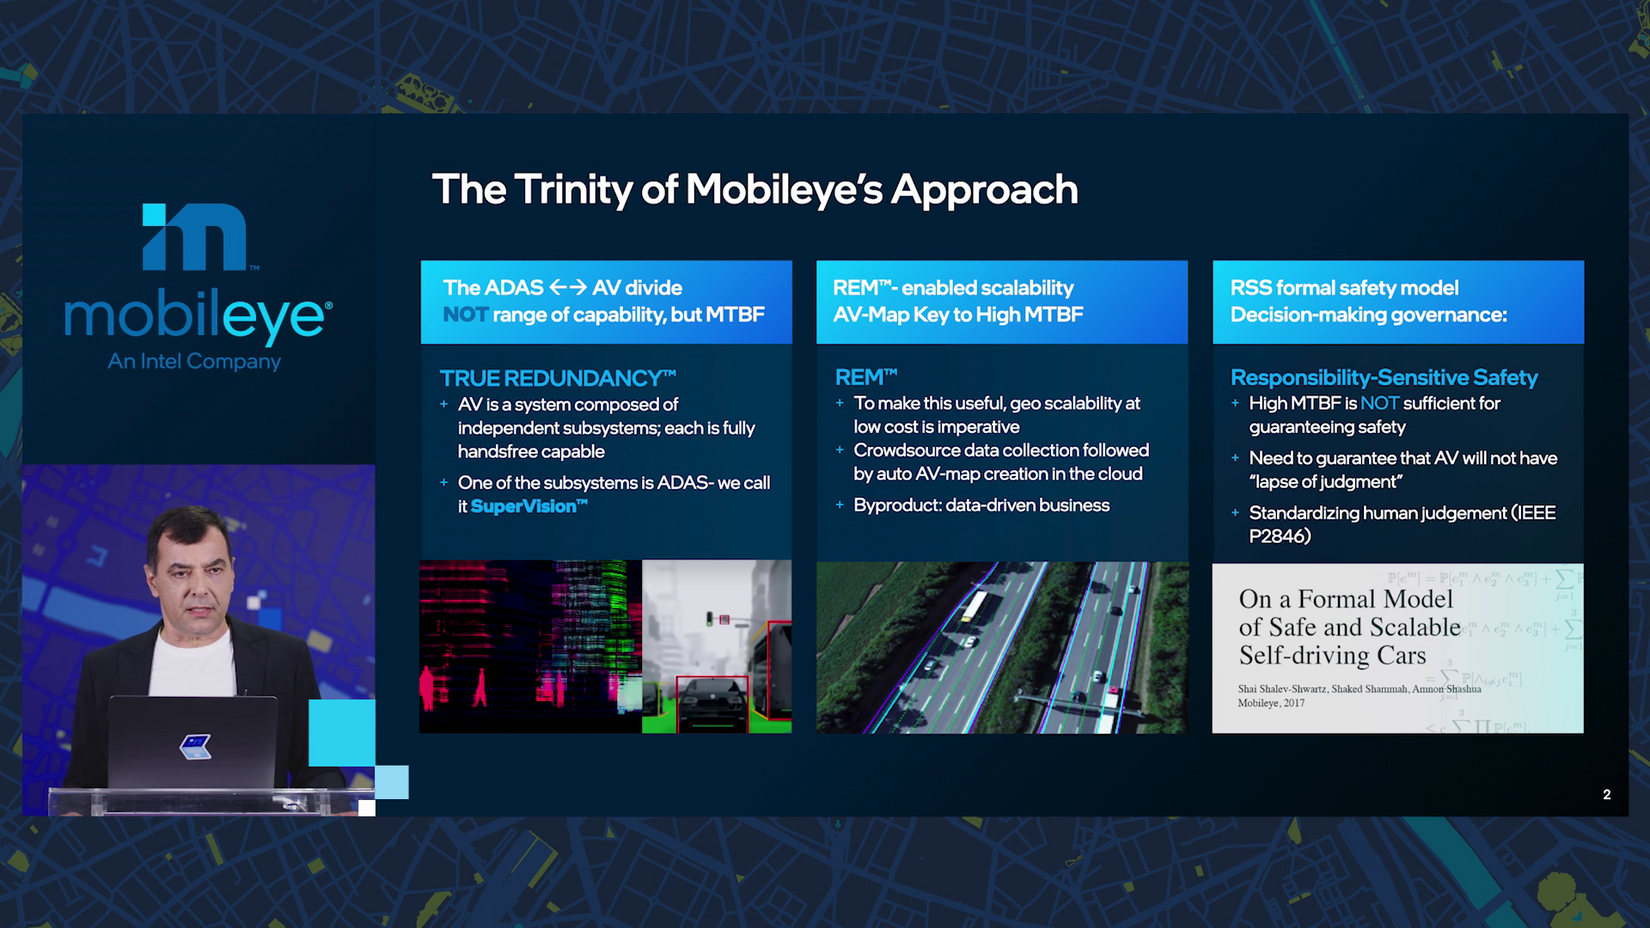 The trinity of Mobileye's approach